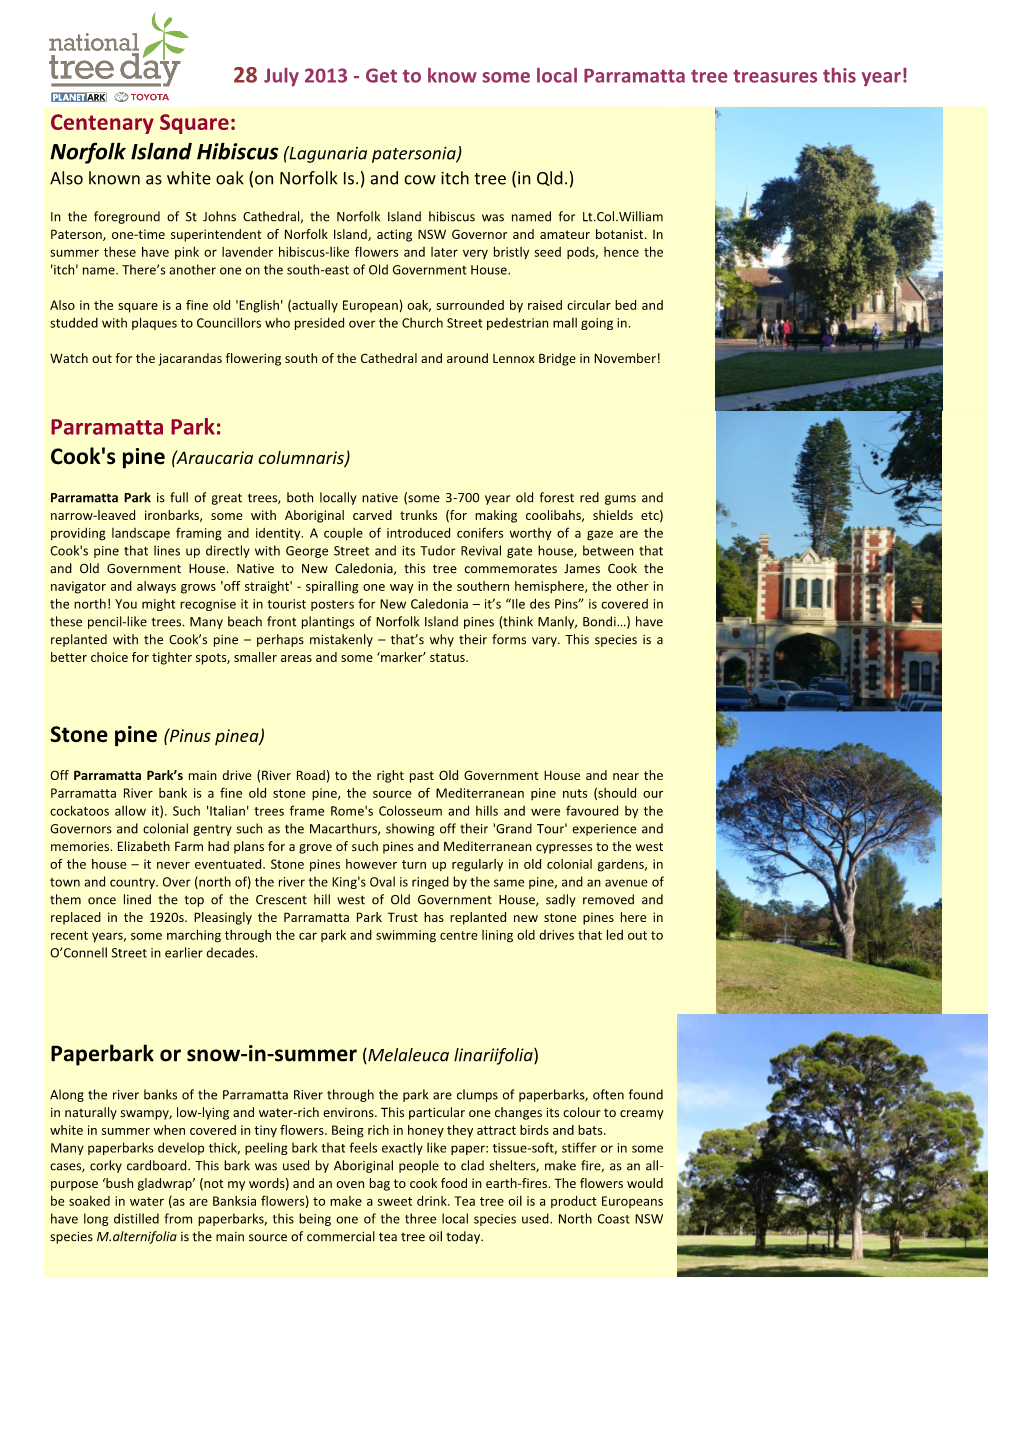 Get to Know Some Local Parramatta Tree Treasures This Year!